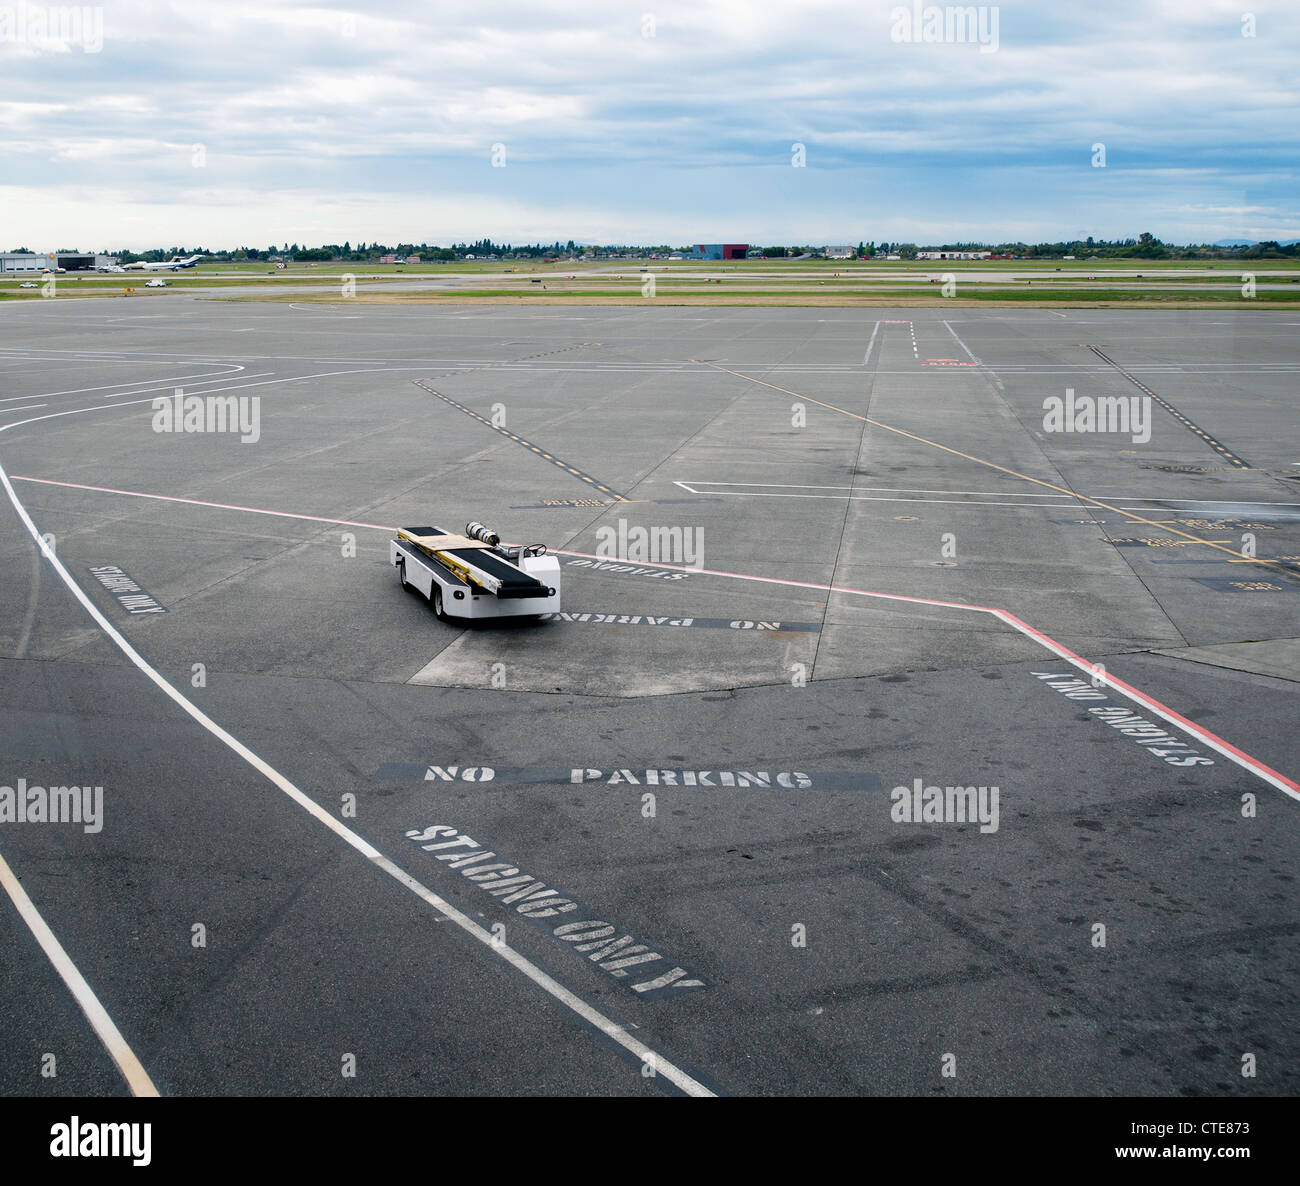 View from above. The airport apron, tarmac, marked out areas, for service vehicles. Airside. Stock Photo